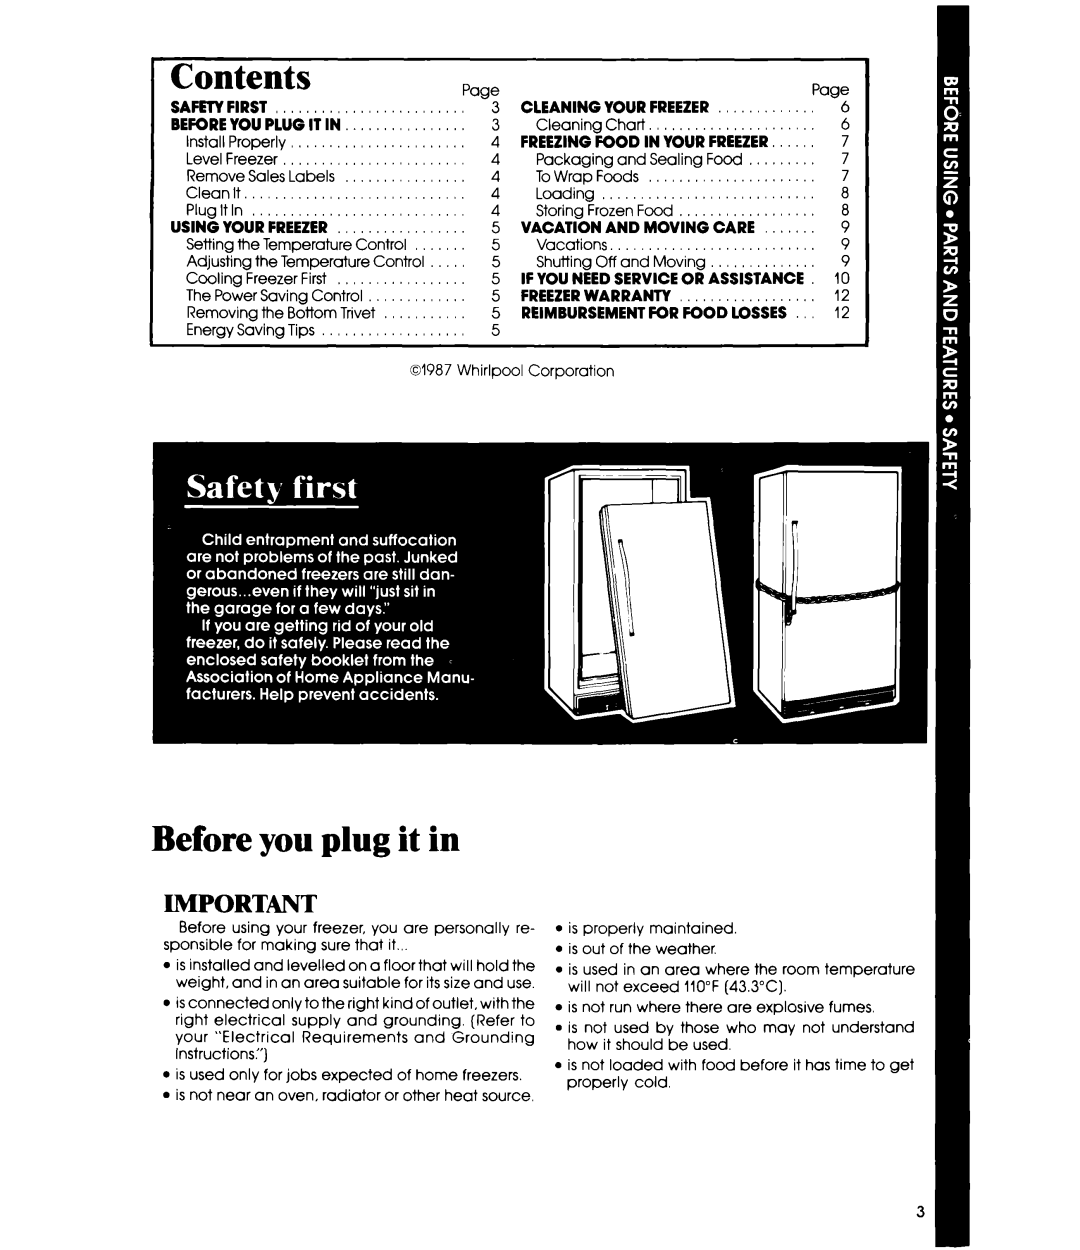 Whirlpool EV130C manual Before you plug it in, Contents 